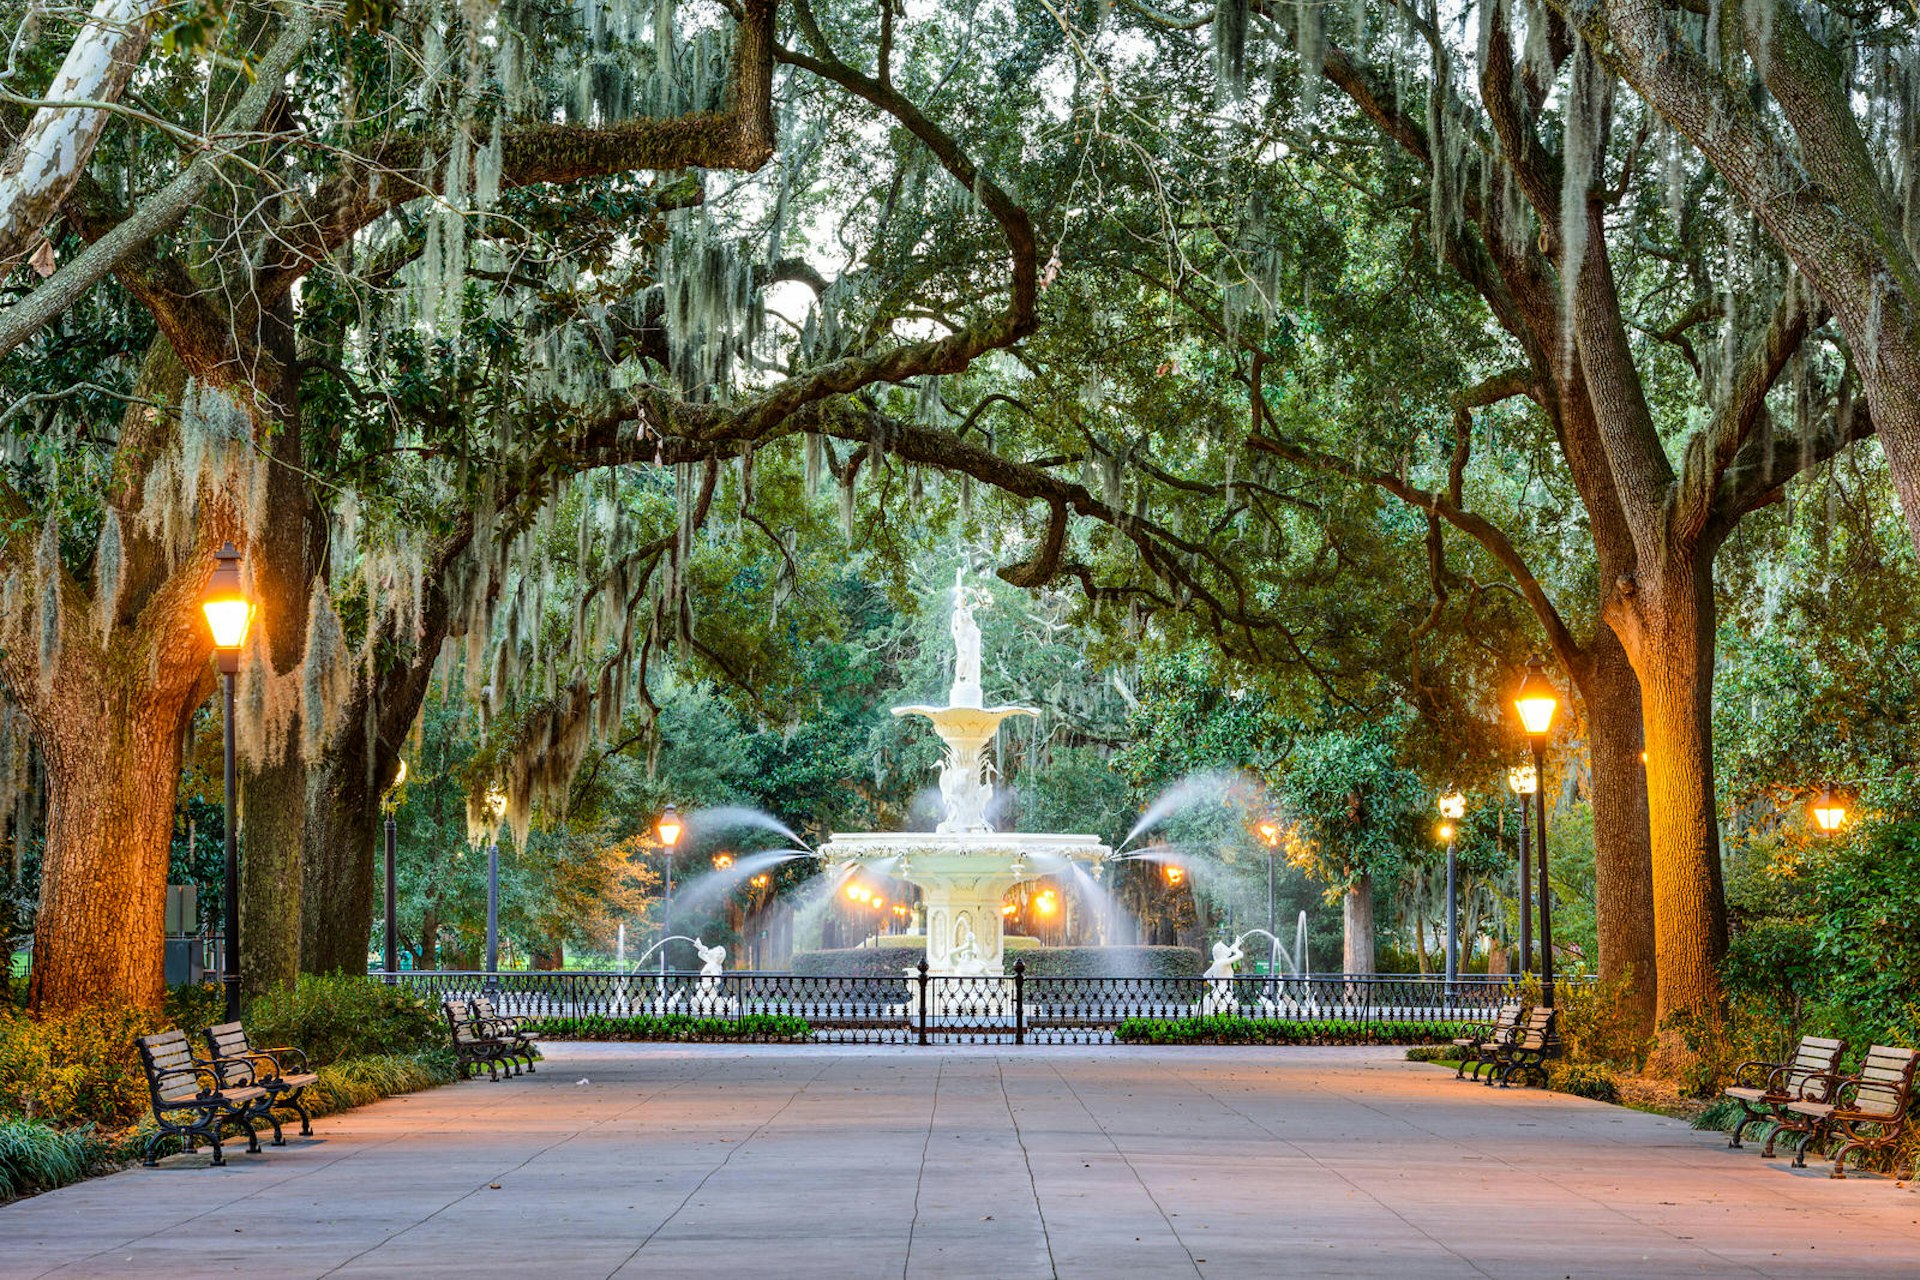 Trees, covered in Spanish moss, lean over a paved public pathway that leads to a gorgeous fountain; like a two tiered wedding cake water spurts up from the top and down to the main pool, from which various jets spew water in arches towards the center